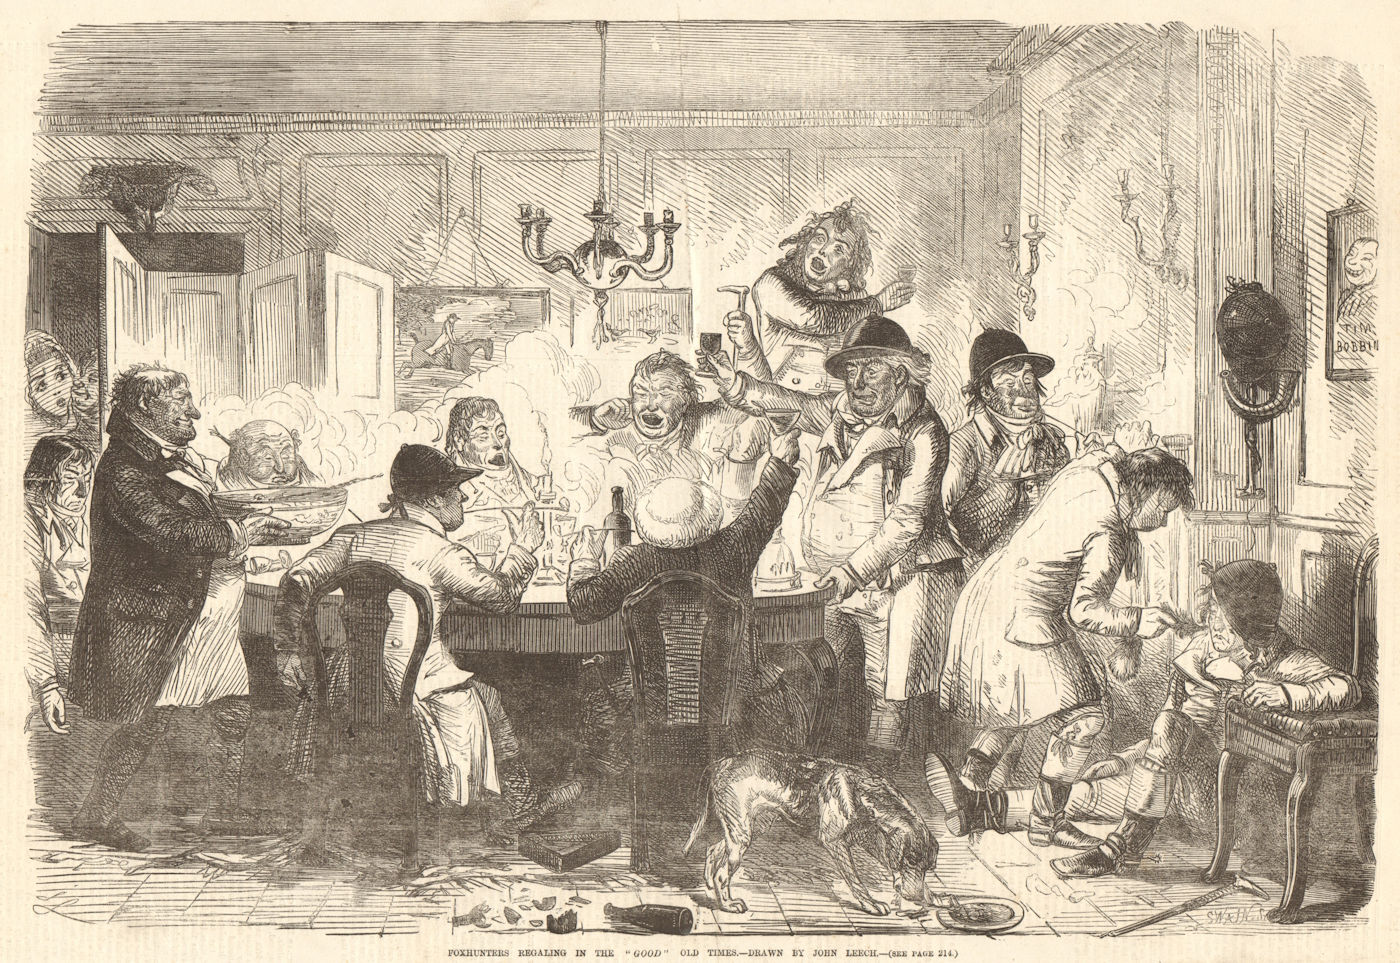 Associate Product Foxhunters regaling in the "good" old times. Society. Hunting 1856 ILN print